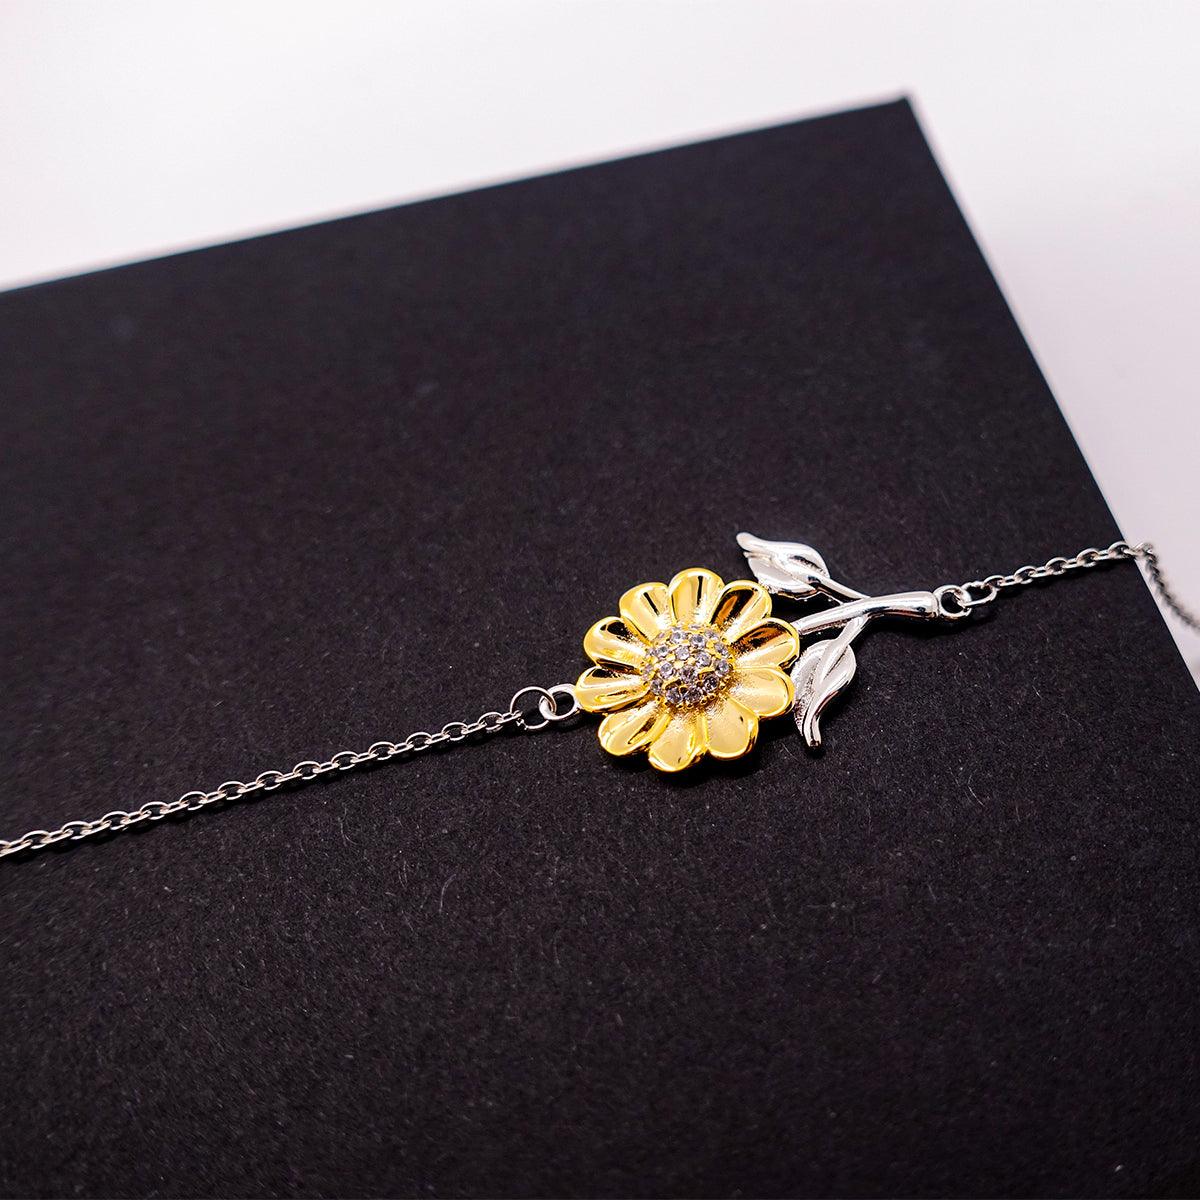 Remarkable Law Enforcement Officer Gifts, Your dedication and hard work, Inspirational Birthday Christmas Unique Sunflower Bracelet For Law Enforcement Officer, Coworkers, Men, Women, Friends - Mallard Moon Gift Shop